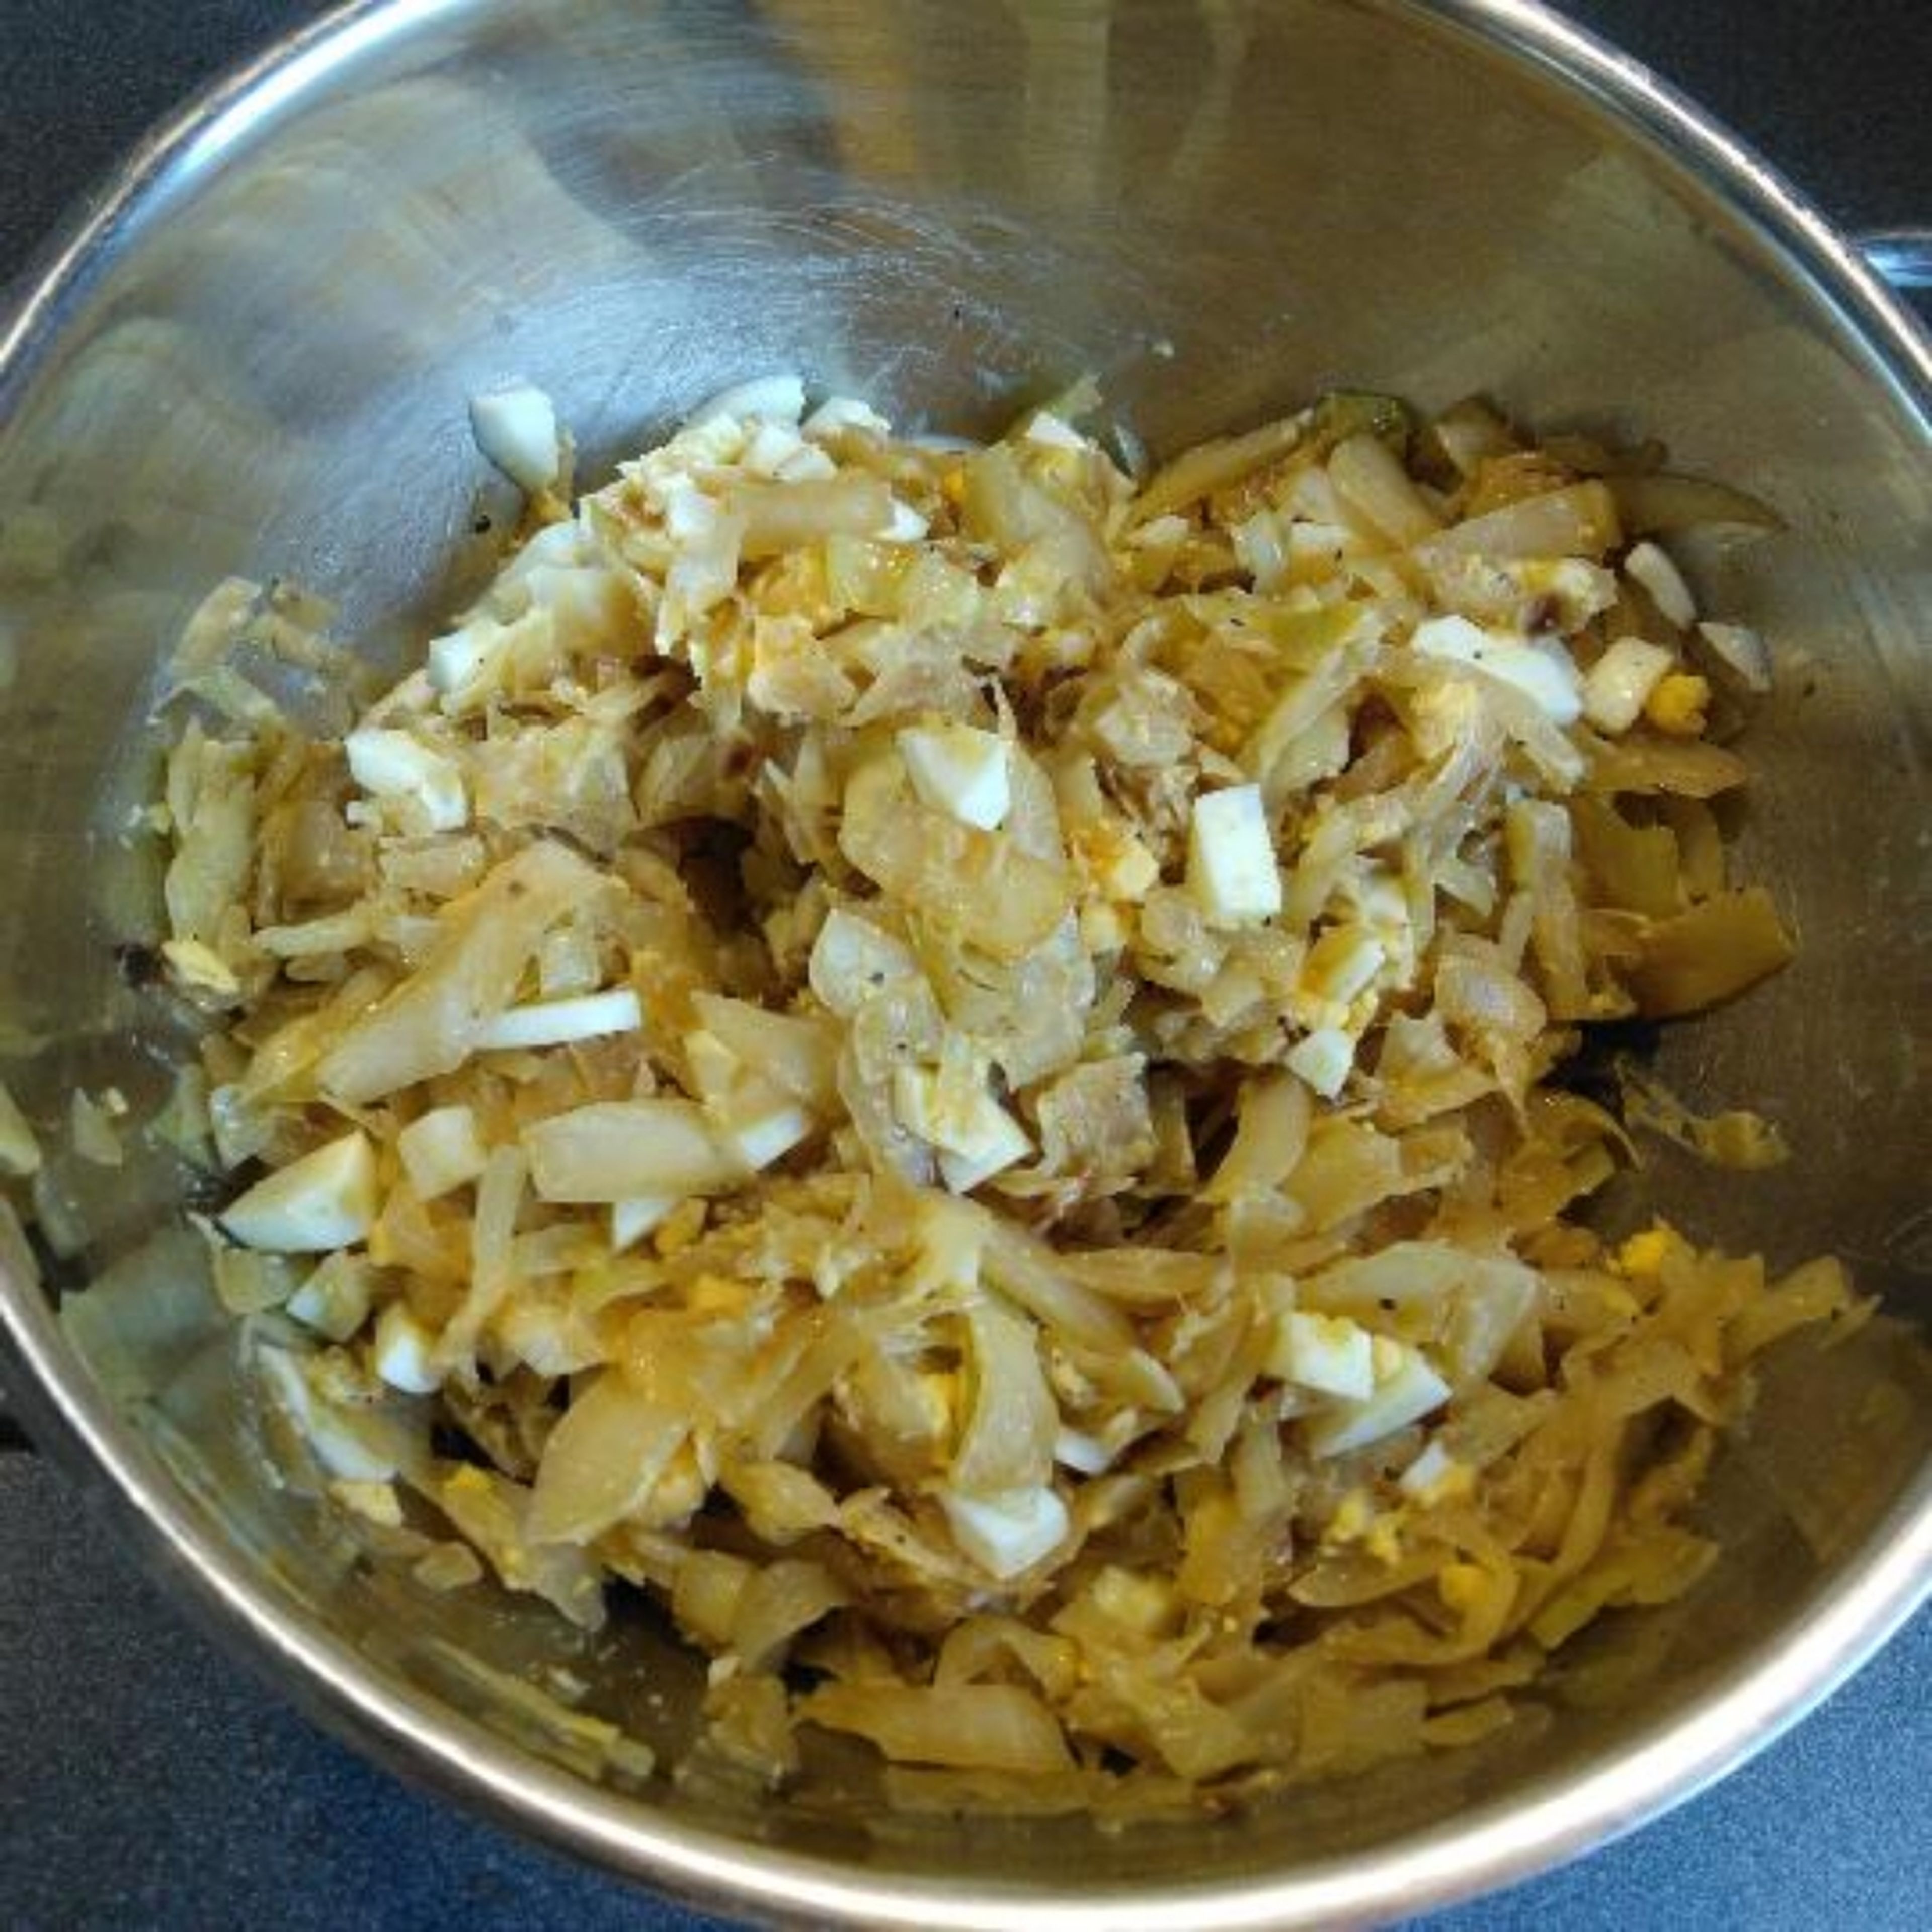 In a bowl mix cabbage and eggs, and season lightly with salt and pepper. Set aside and let cool.